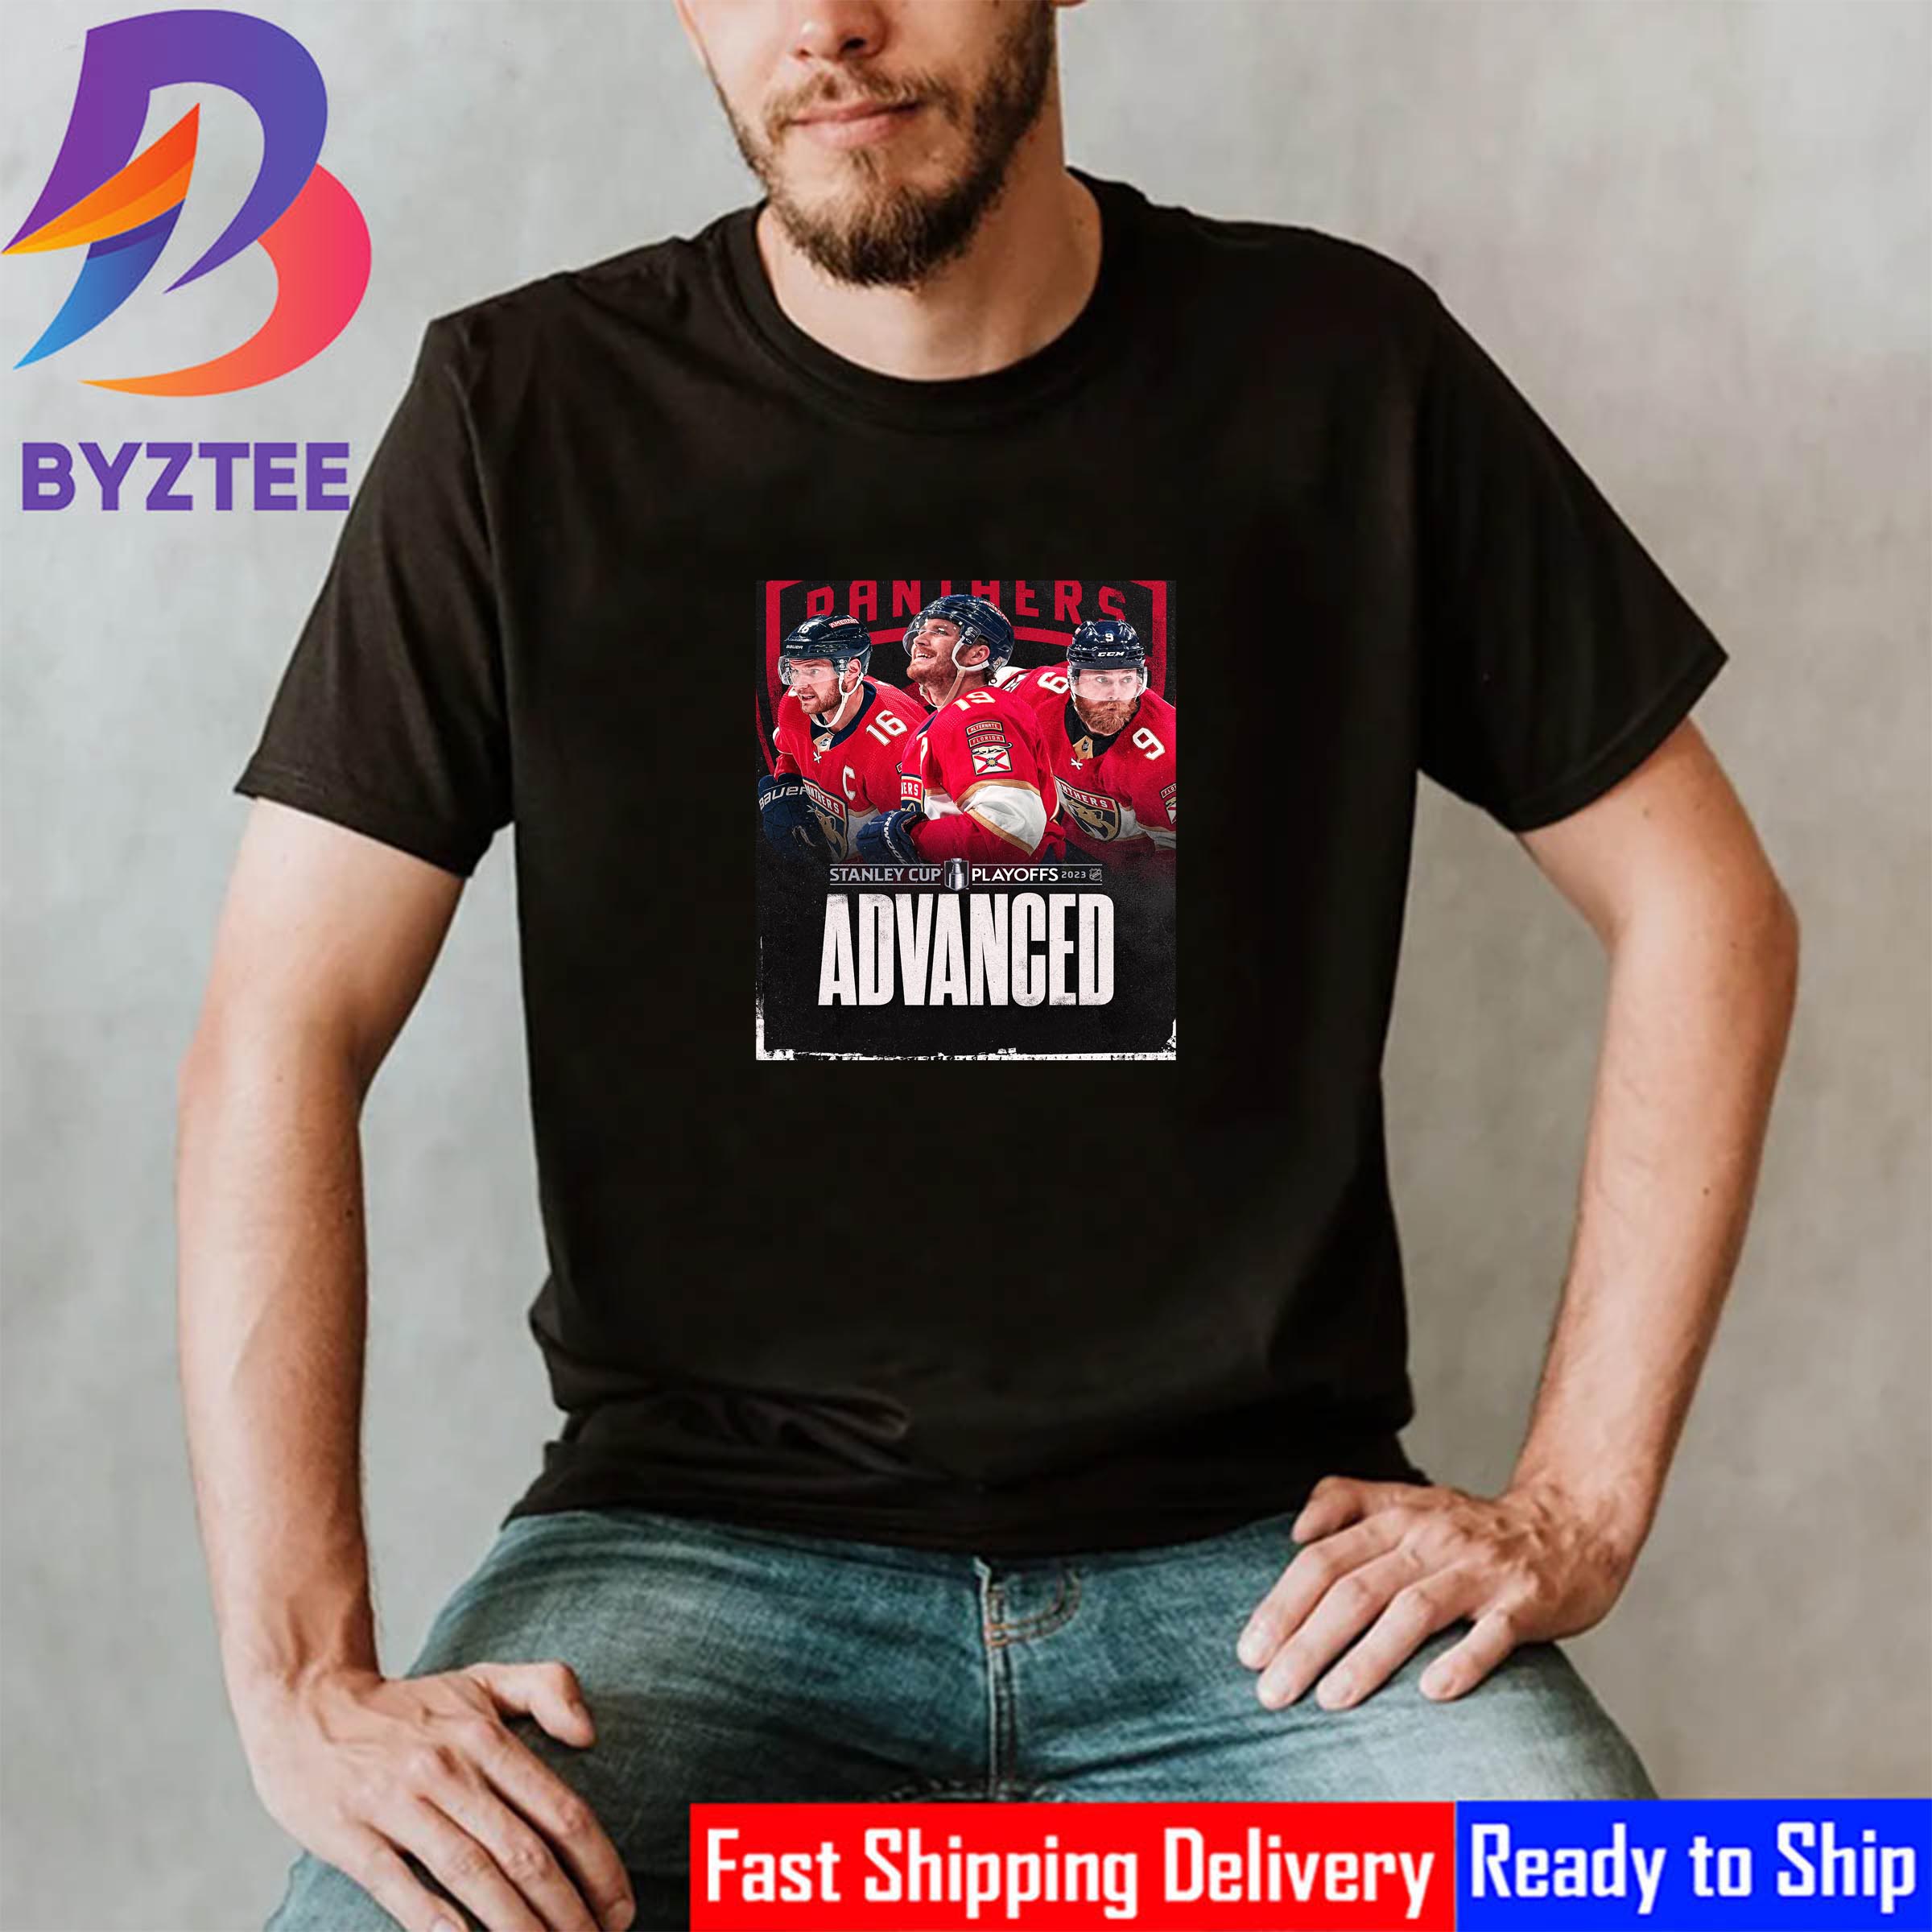 https://byztee.com/wp-content/uploads/2023/05/Florida-Panthers-Eastern-Conference-Champions-Sweep-And-Are-Off-To-The-2023-Stanley-Cup-Final-Shirt_4551173-1.jpg